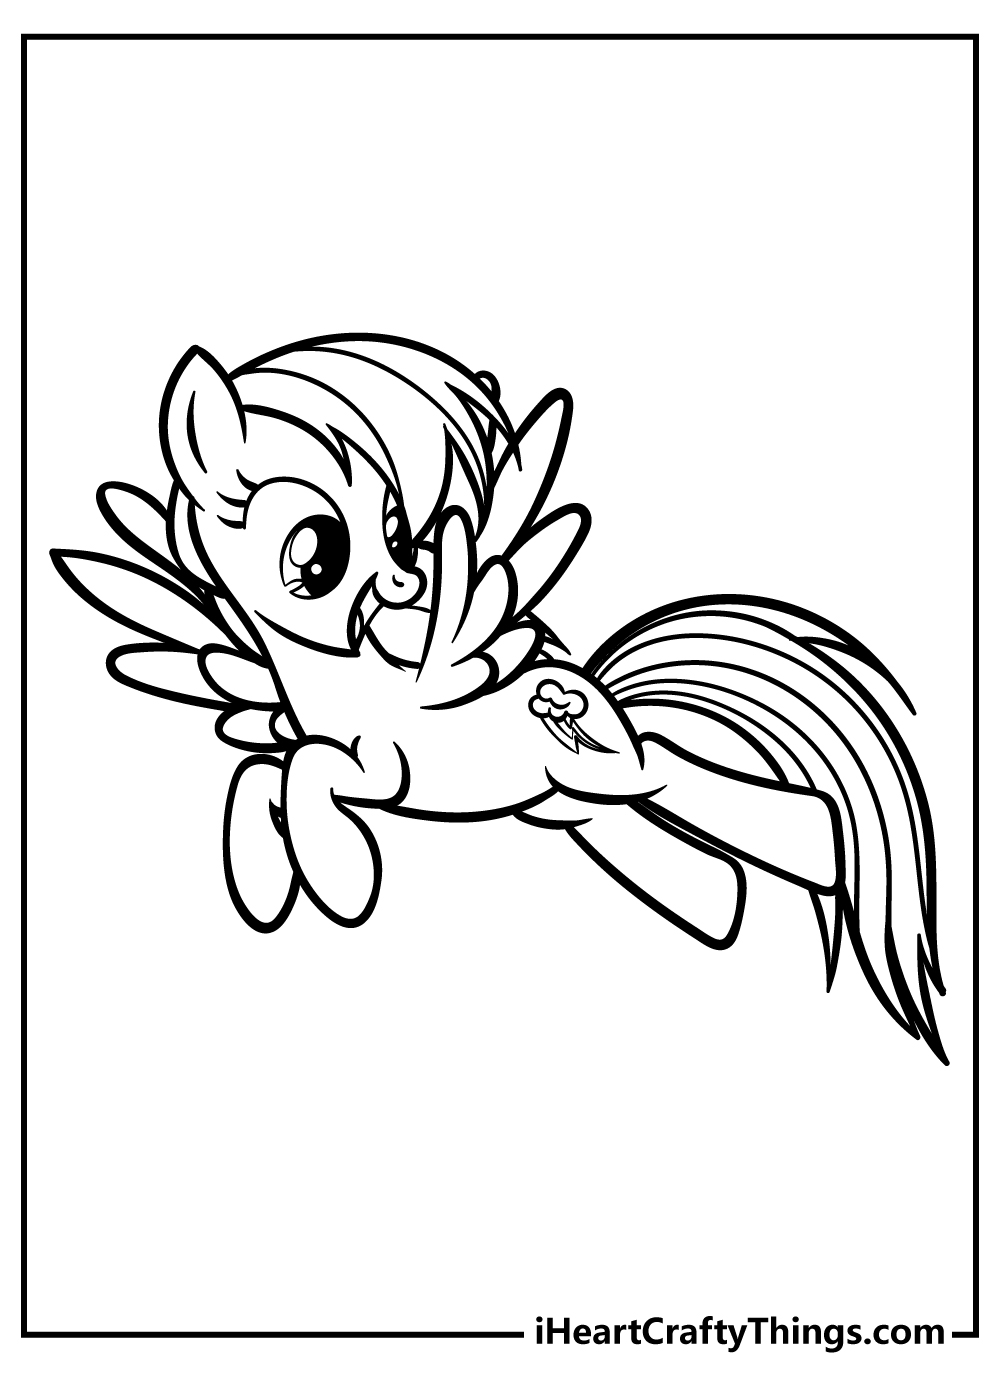 Rainbow Dash Coloring Pages free pdf download